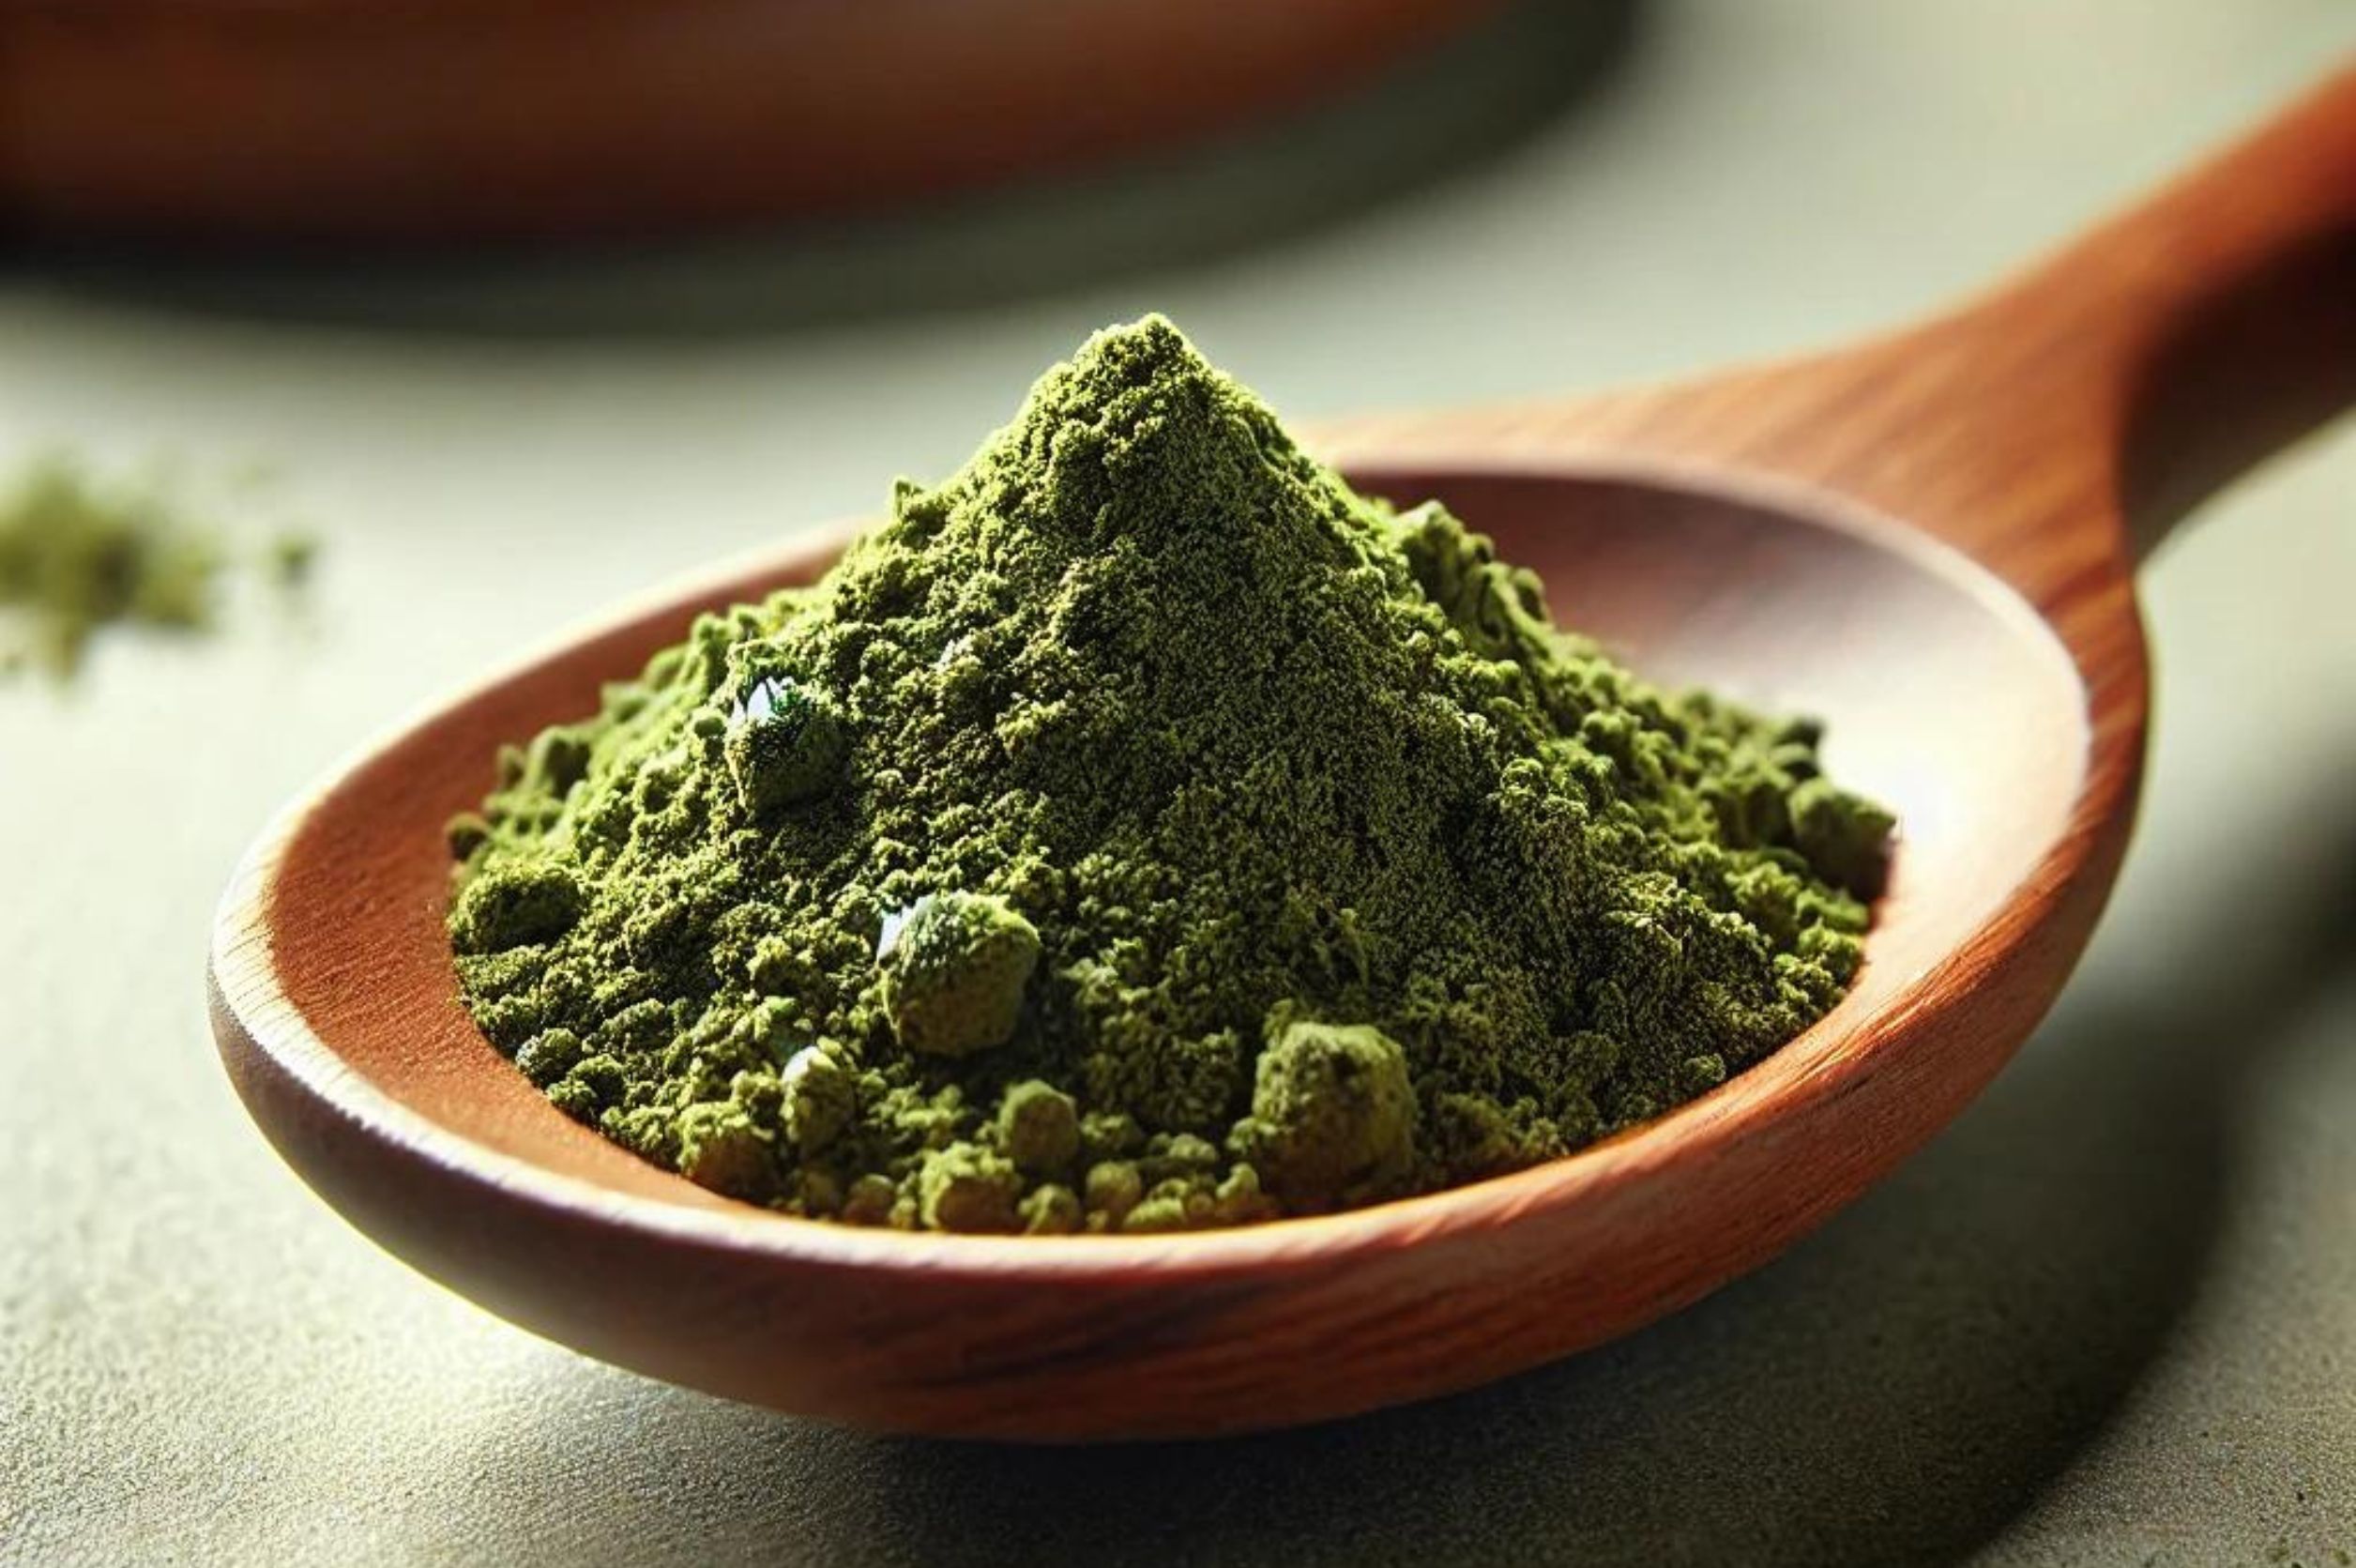 Kratom Serving Size: How Many Grams of Kratom Are In a Tablespoon and Teaspoon?